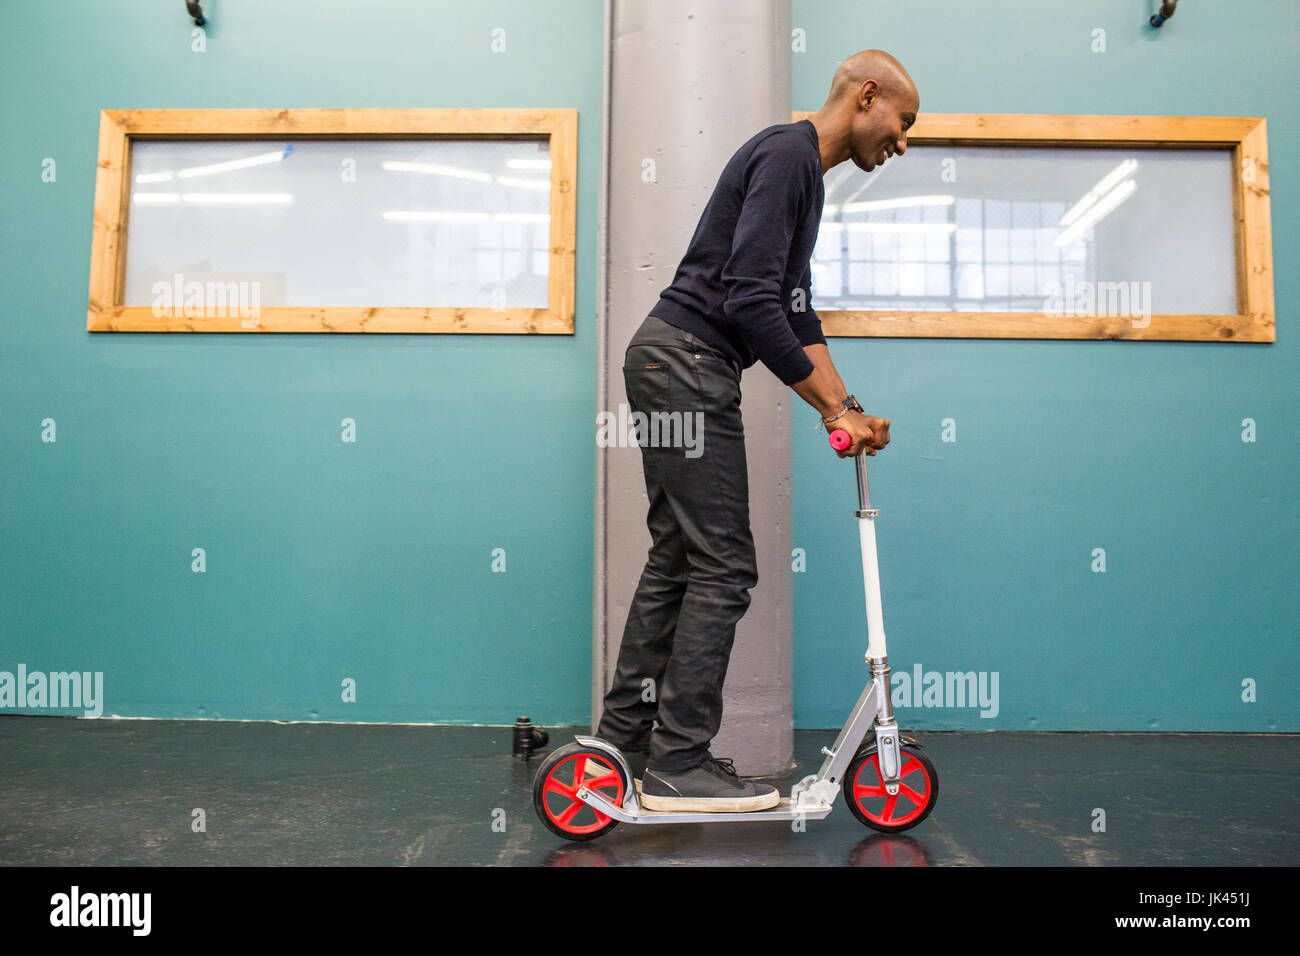 African American man riding scooter indoors Stock Photo